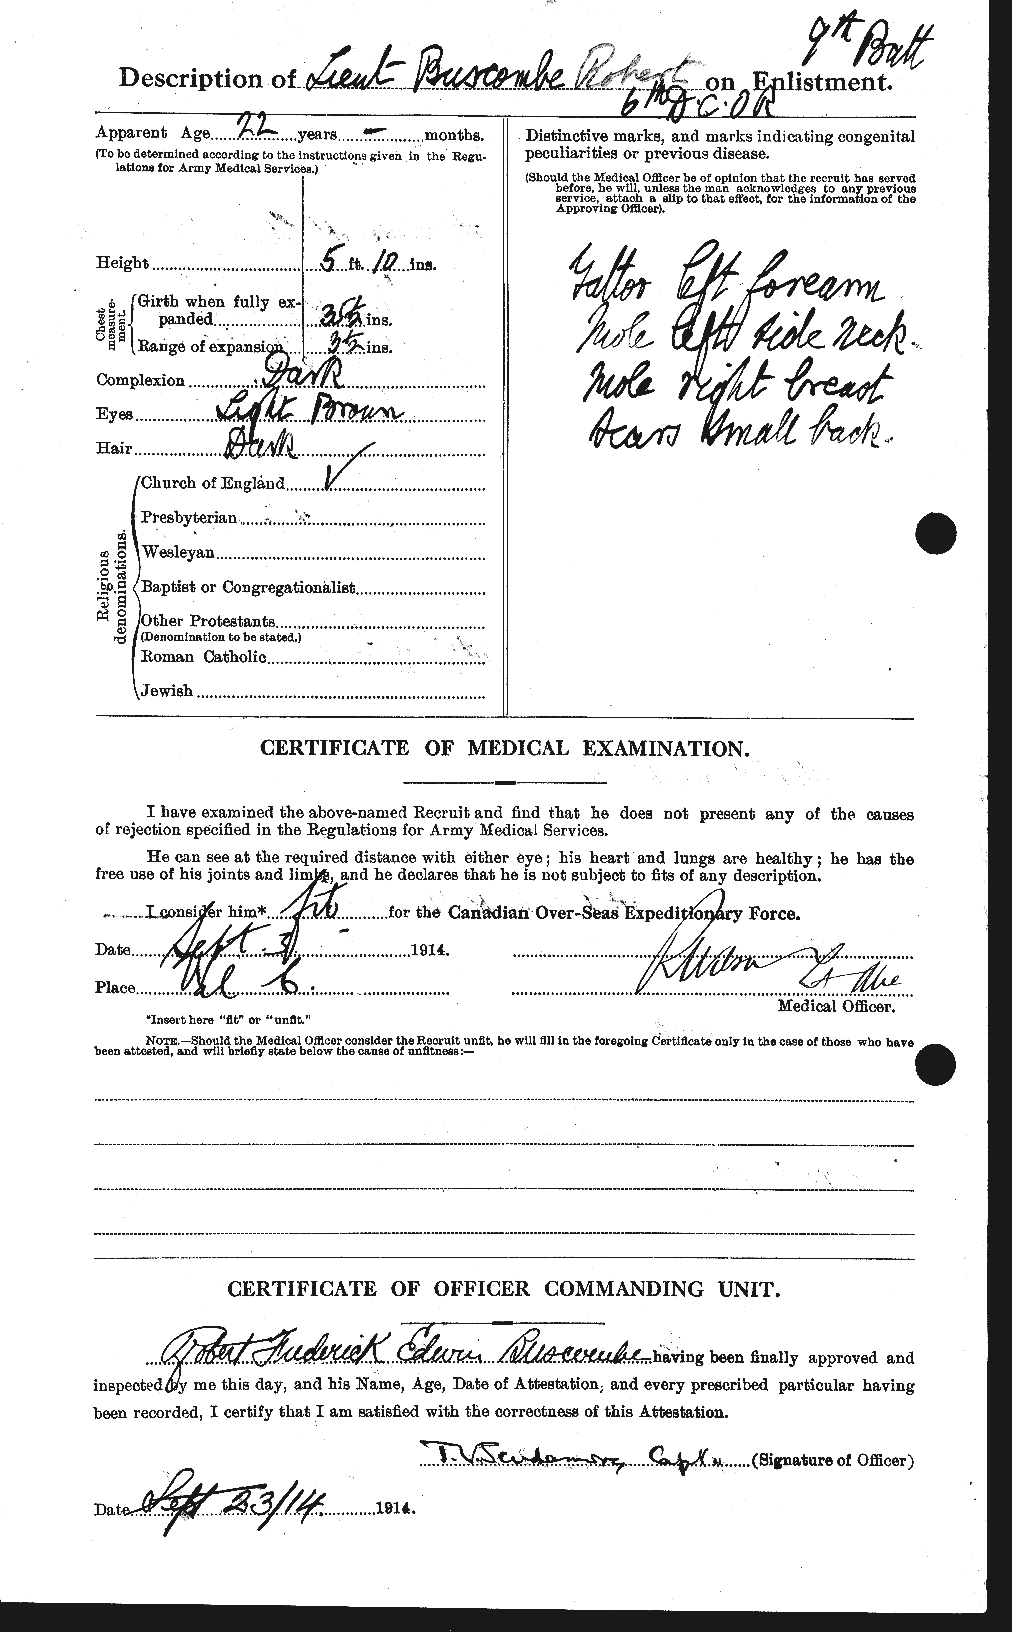 Personnel Records of the First World War - CEF 274310b